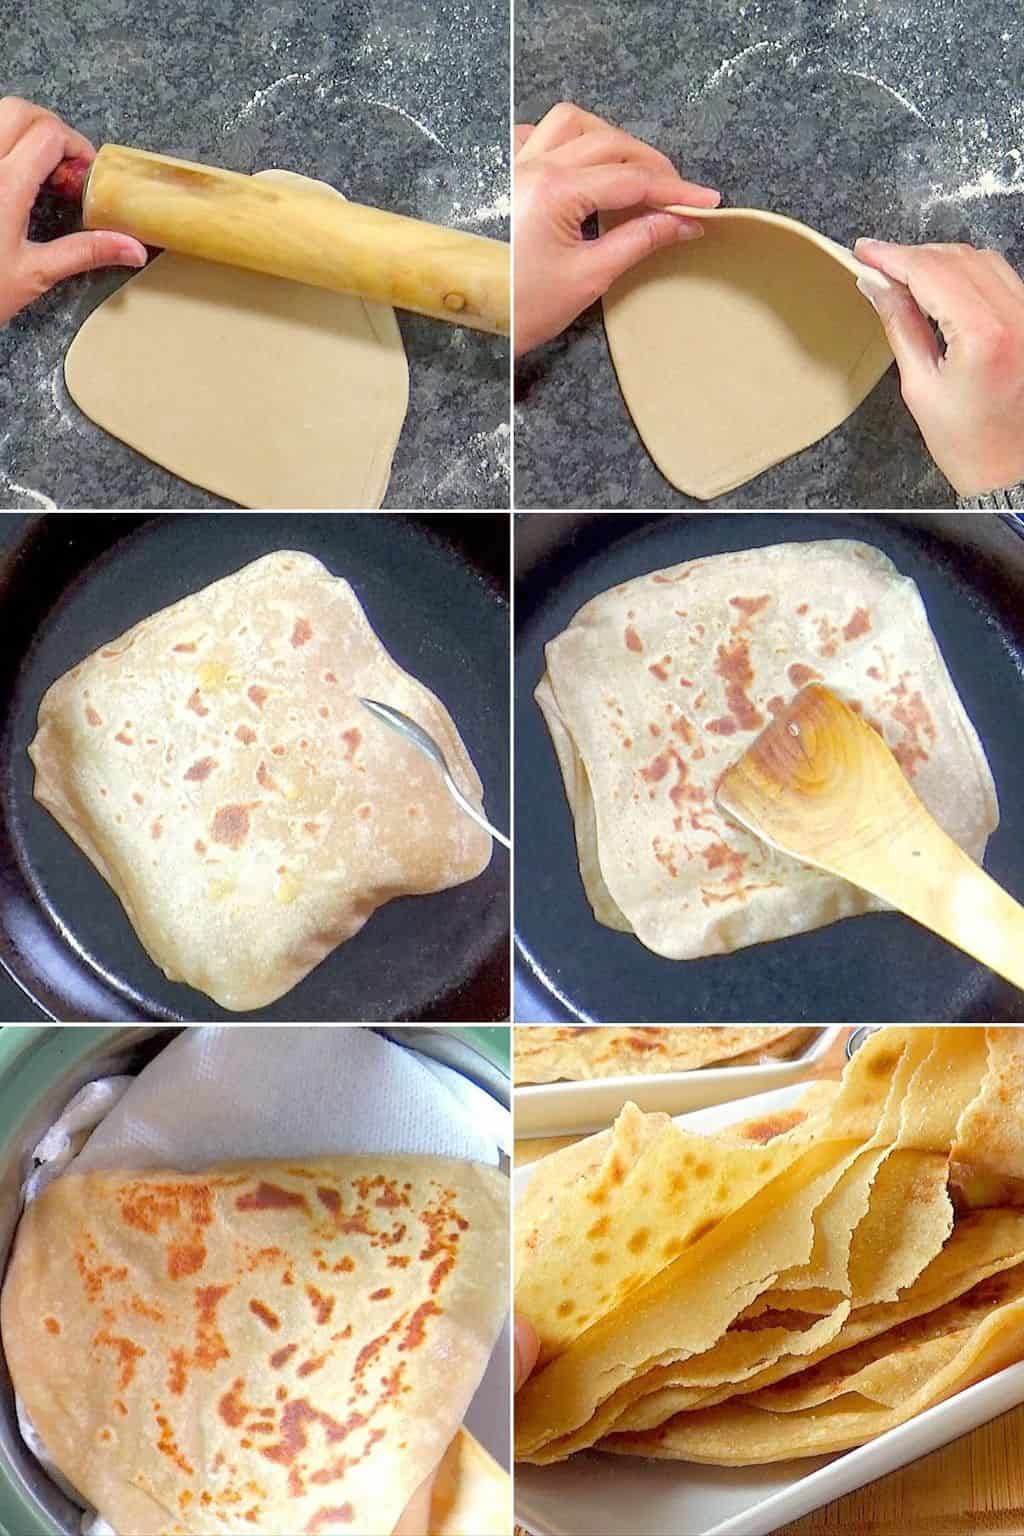 Step by step cooking of layered Indian flatbread.